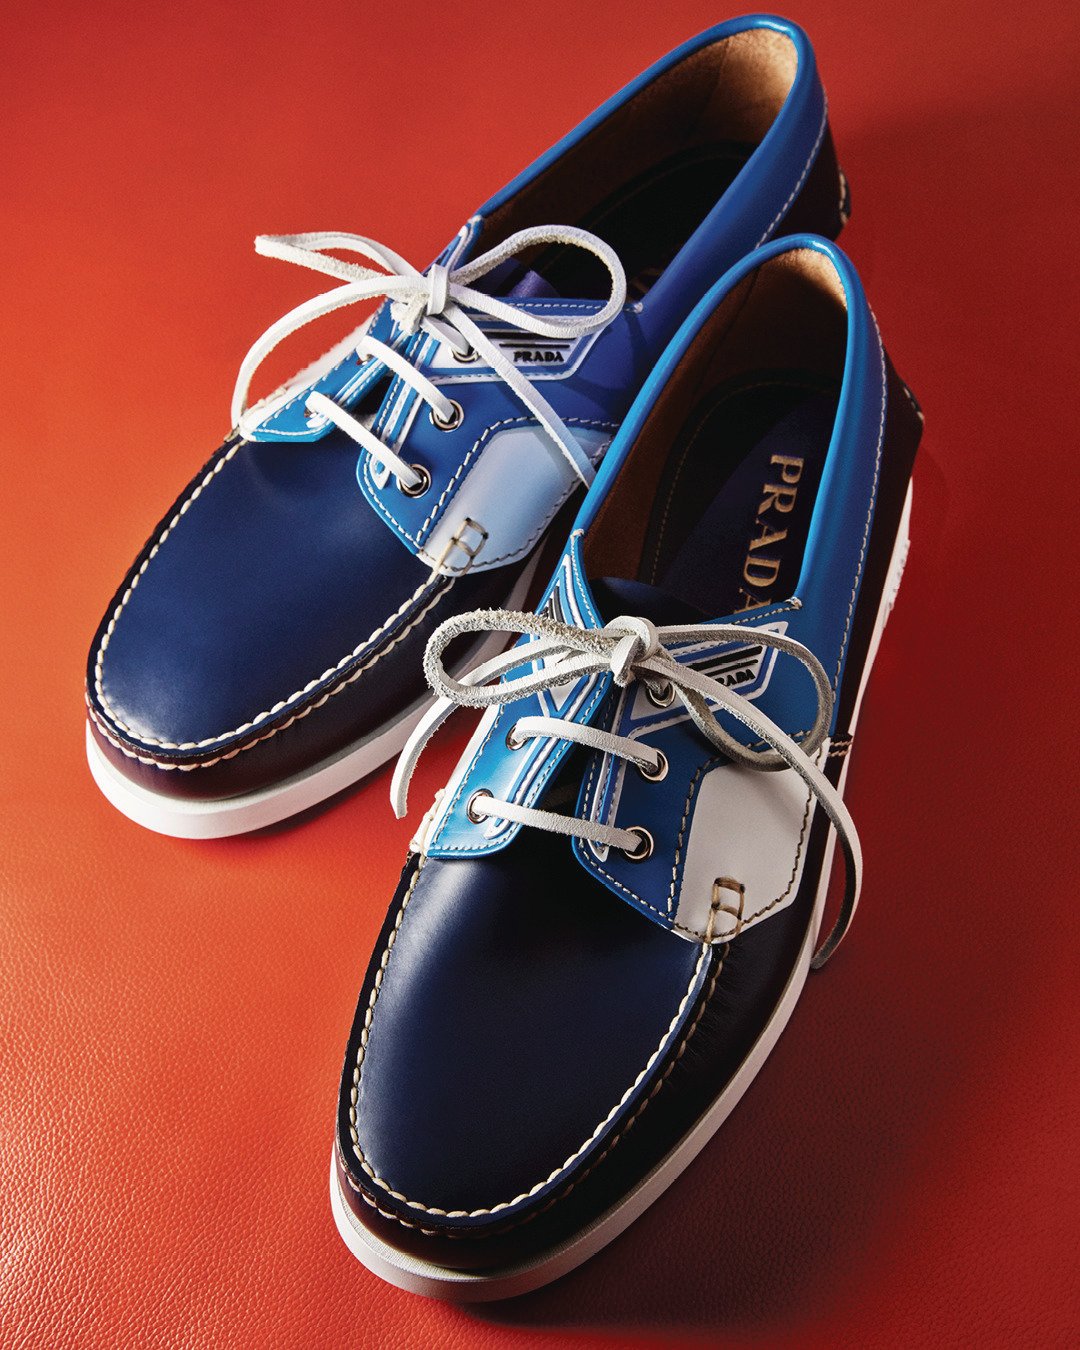 important Historian Monarchy PRADA on Twitter: "“I am seeing and always being seen.” #Prada brushed  leather boat shoes in sky and navy. Discover #PradaSS19 at  https://t.co/KAMS3vBPm3. #PradaDoubleExposure https://t.co/12iWwPvOuM" /  Twitter